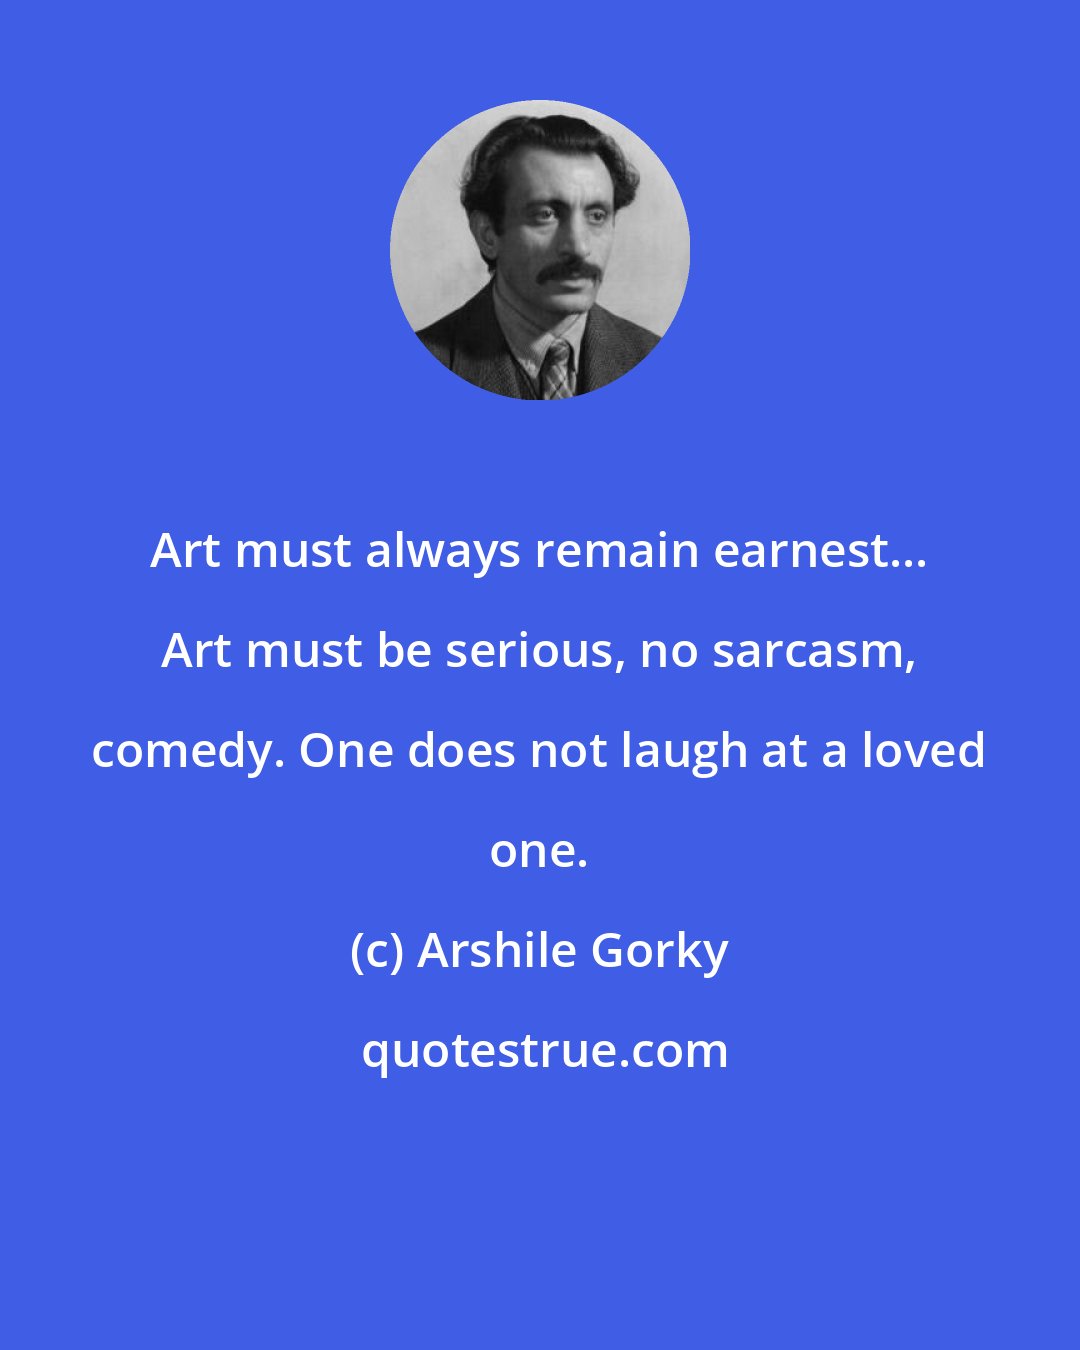 Arshile Gorky: Art must always remain earnest... Art must be serious, no sarcasm, comedy. One does not laugh at a loved one.